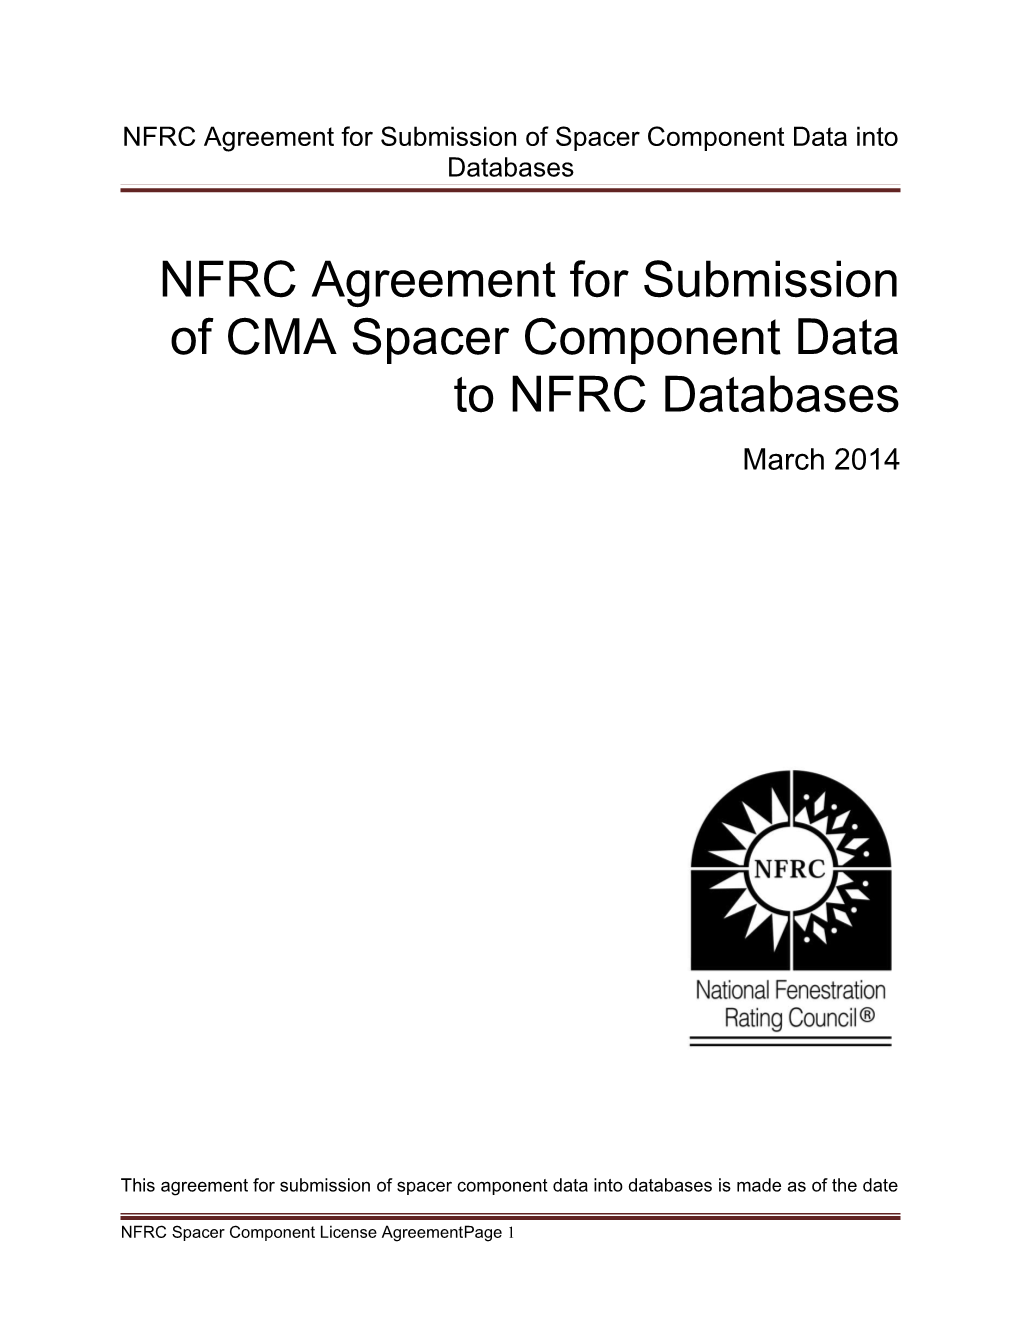 NFRC Agreement for Submission of Spacer Component Data Into Databases